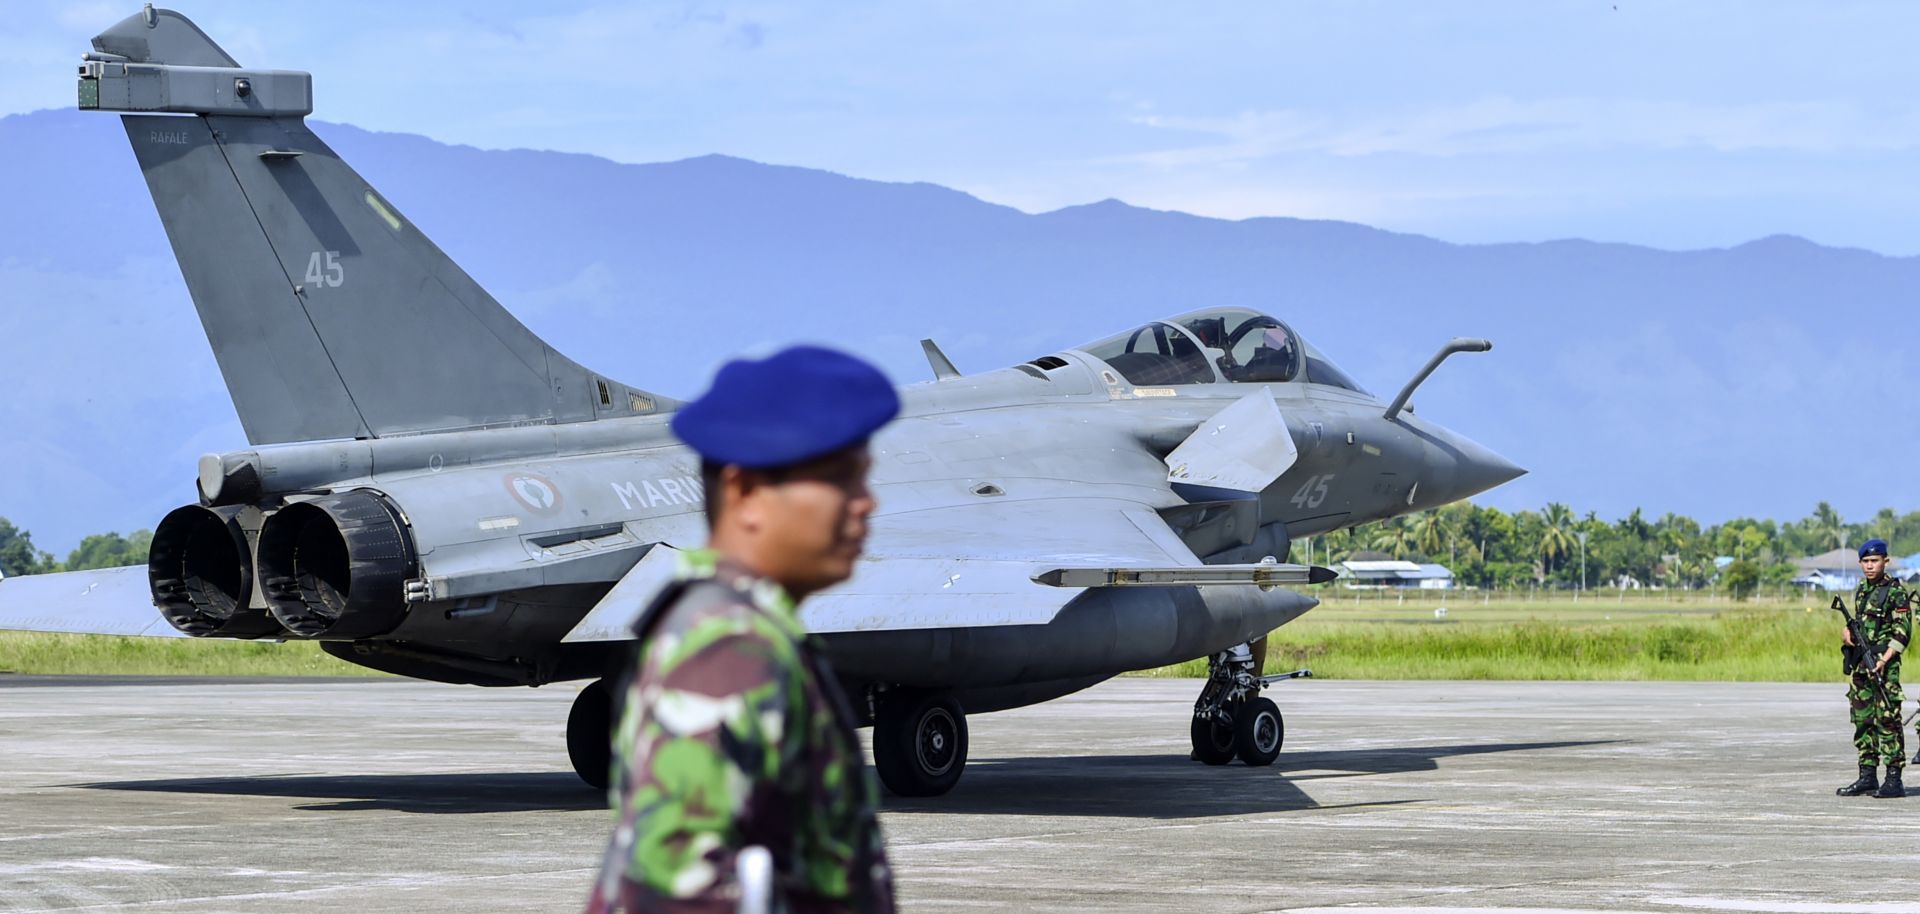 Indonesian soldiers stand guard near a French Rafale fighter jet at a military base in Blang Bintang, Indonesia, on May 19, 2019.